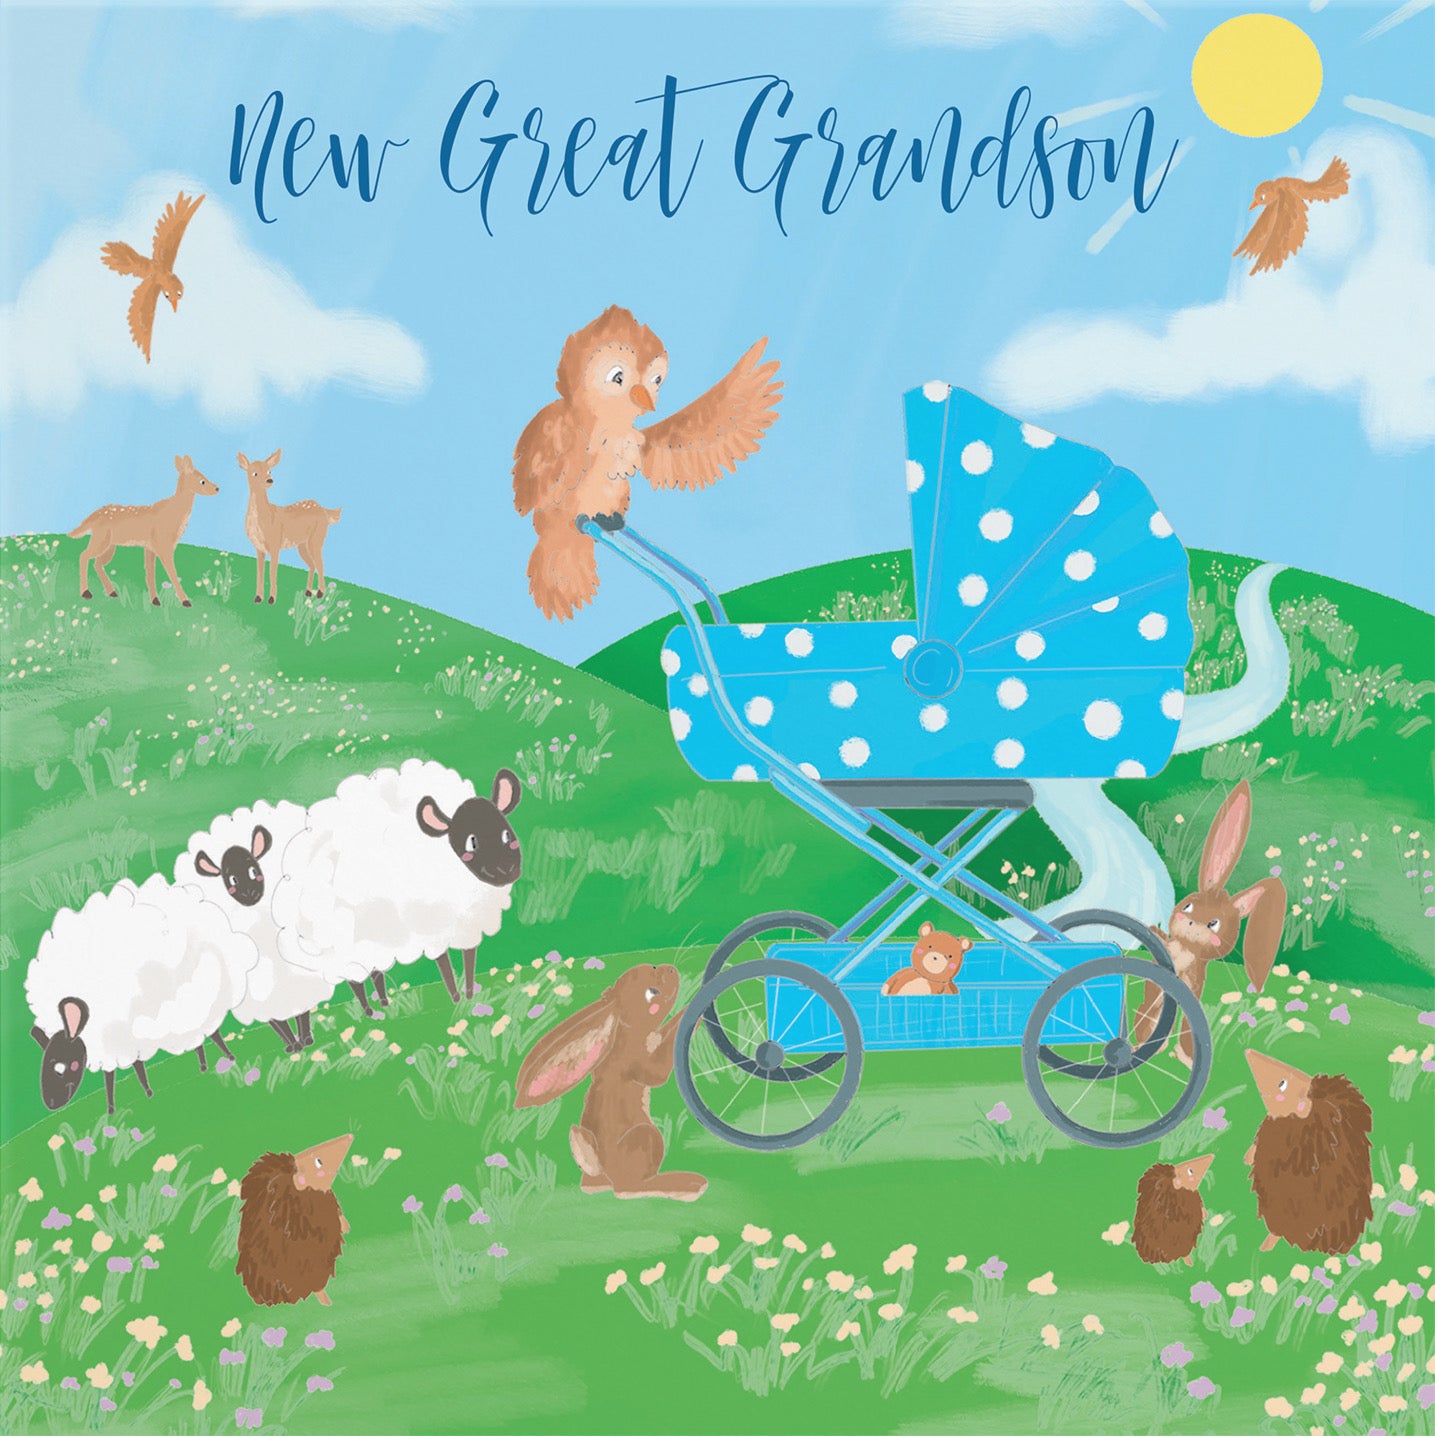 New Great Grandson New Baby Congratulations Card Countryside - Default Title (B09VMKW4QW)